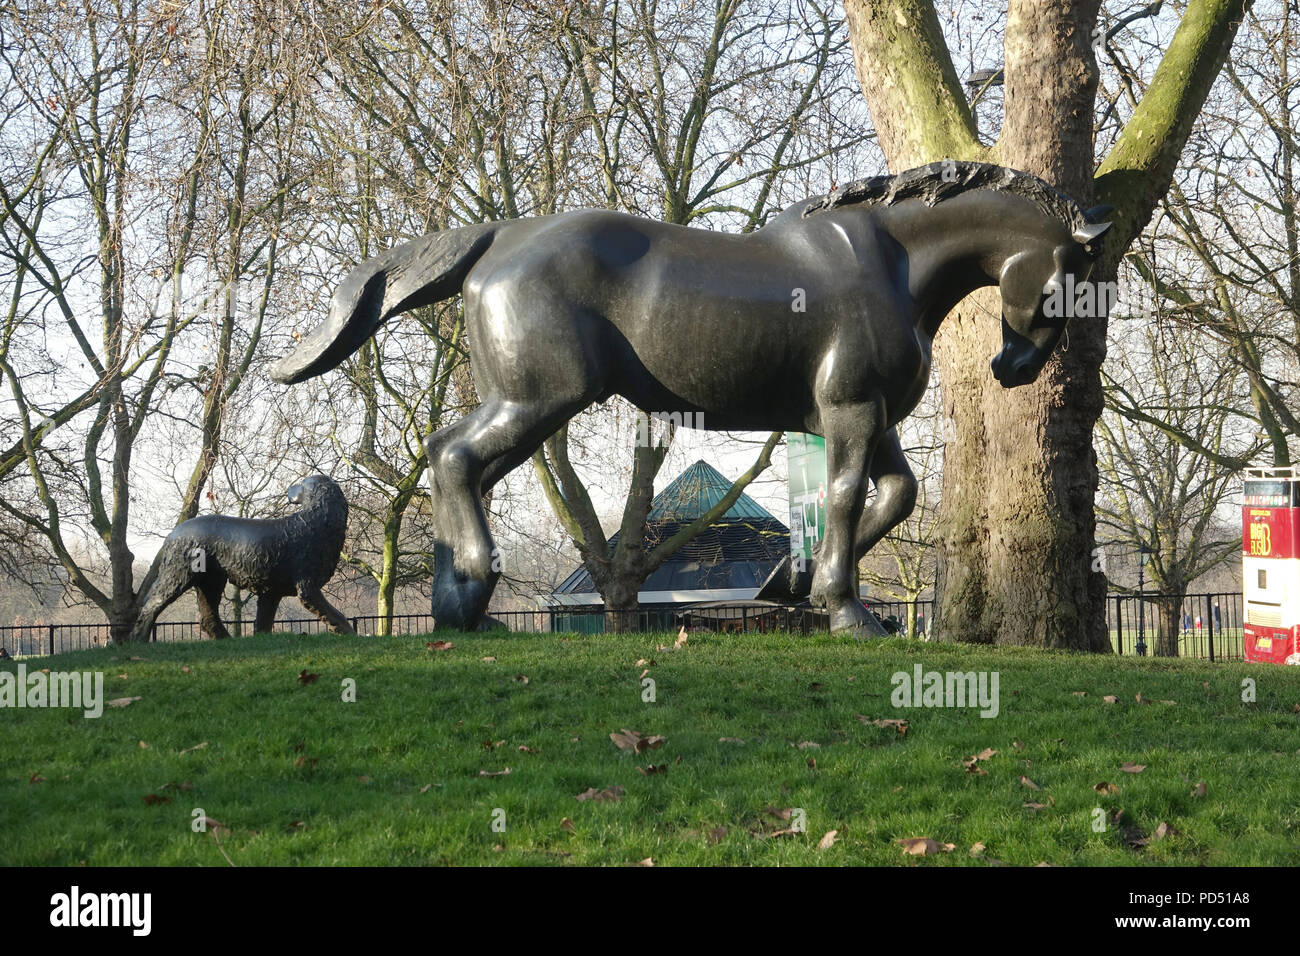 LONDON-ENGLAND-JAN 21, 2017: The Animals in War Memorial, located outside Hyde Park near Brook Gate, commemorates animals that died in wars and confli Stock Photo